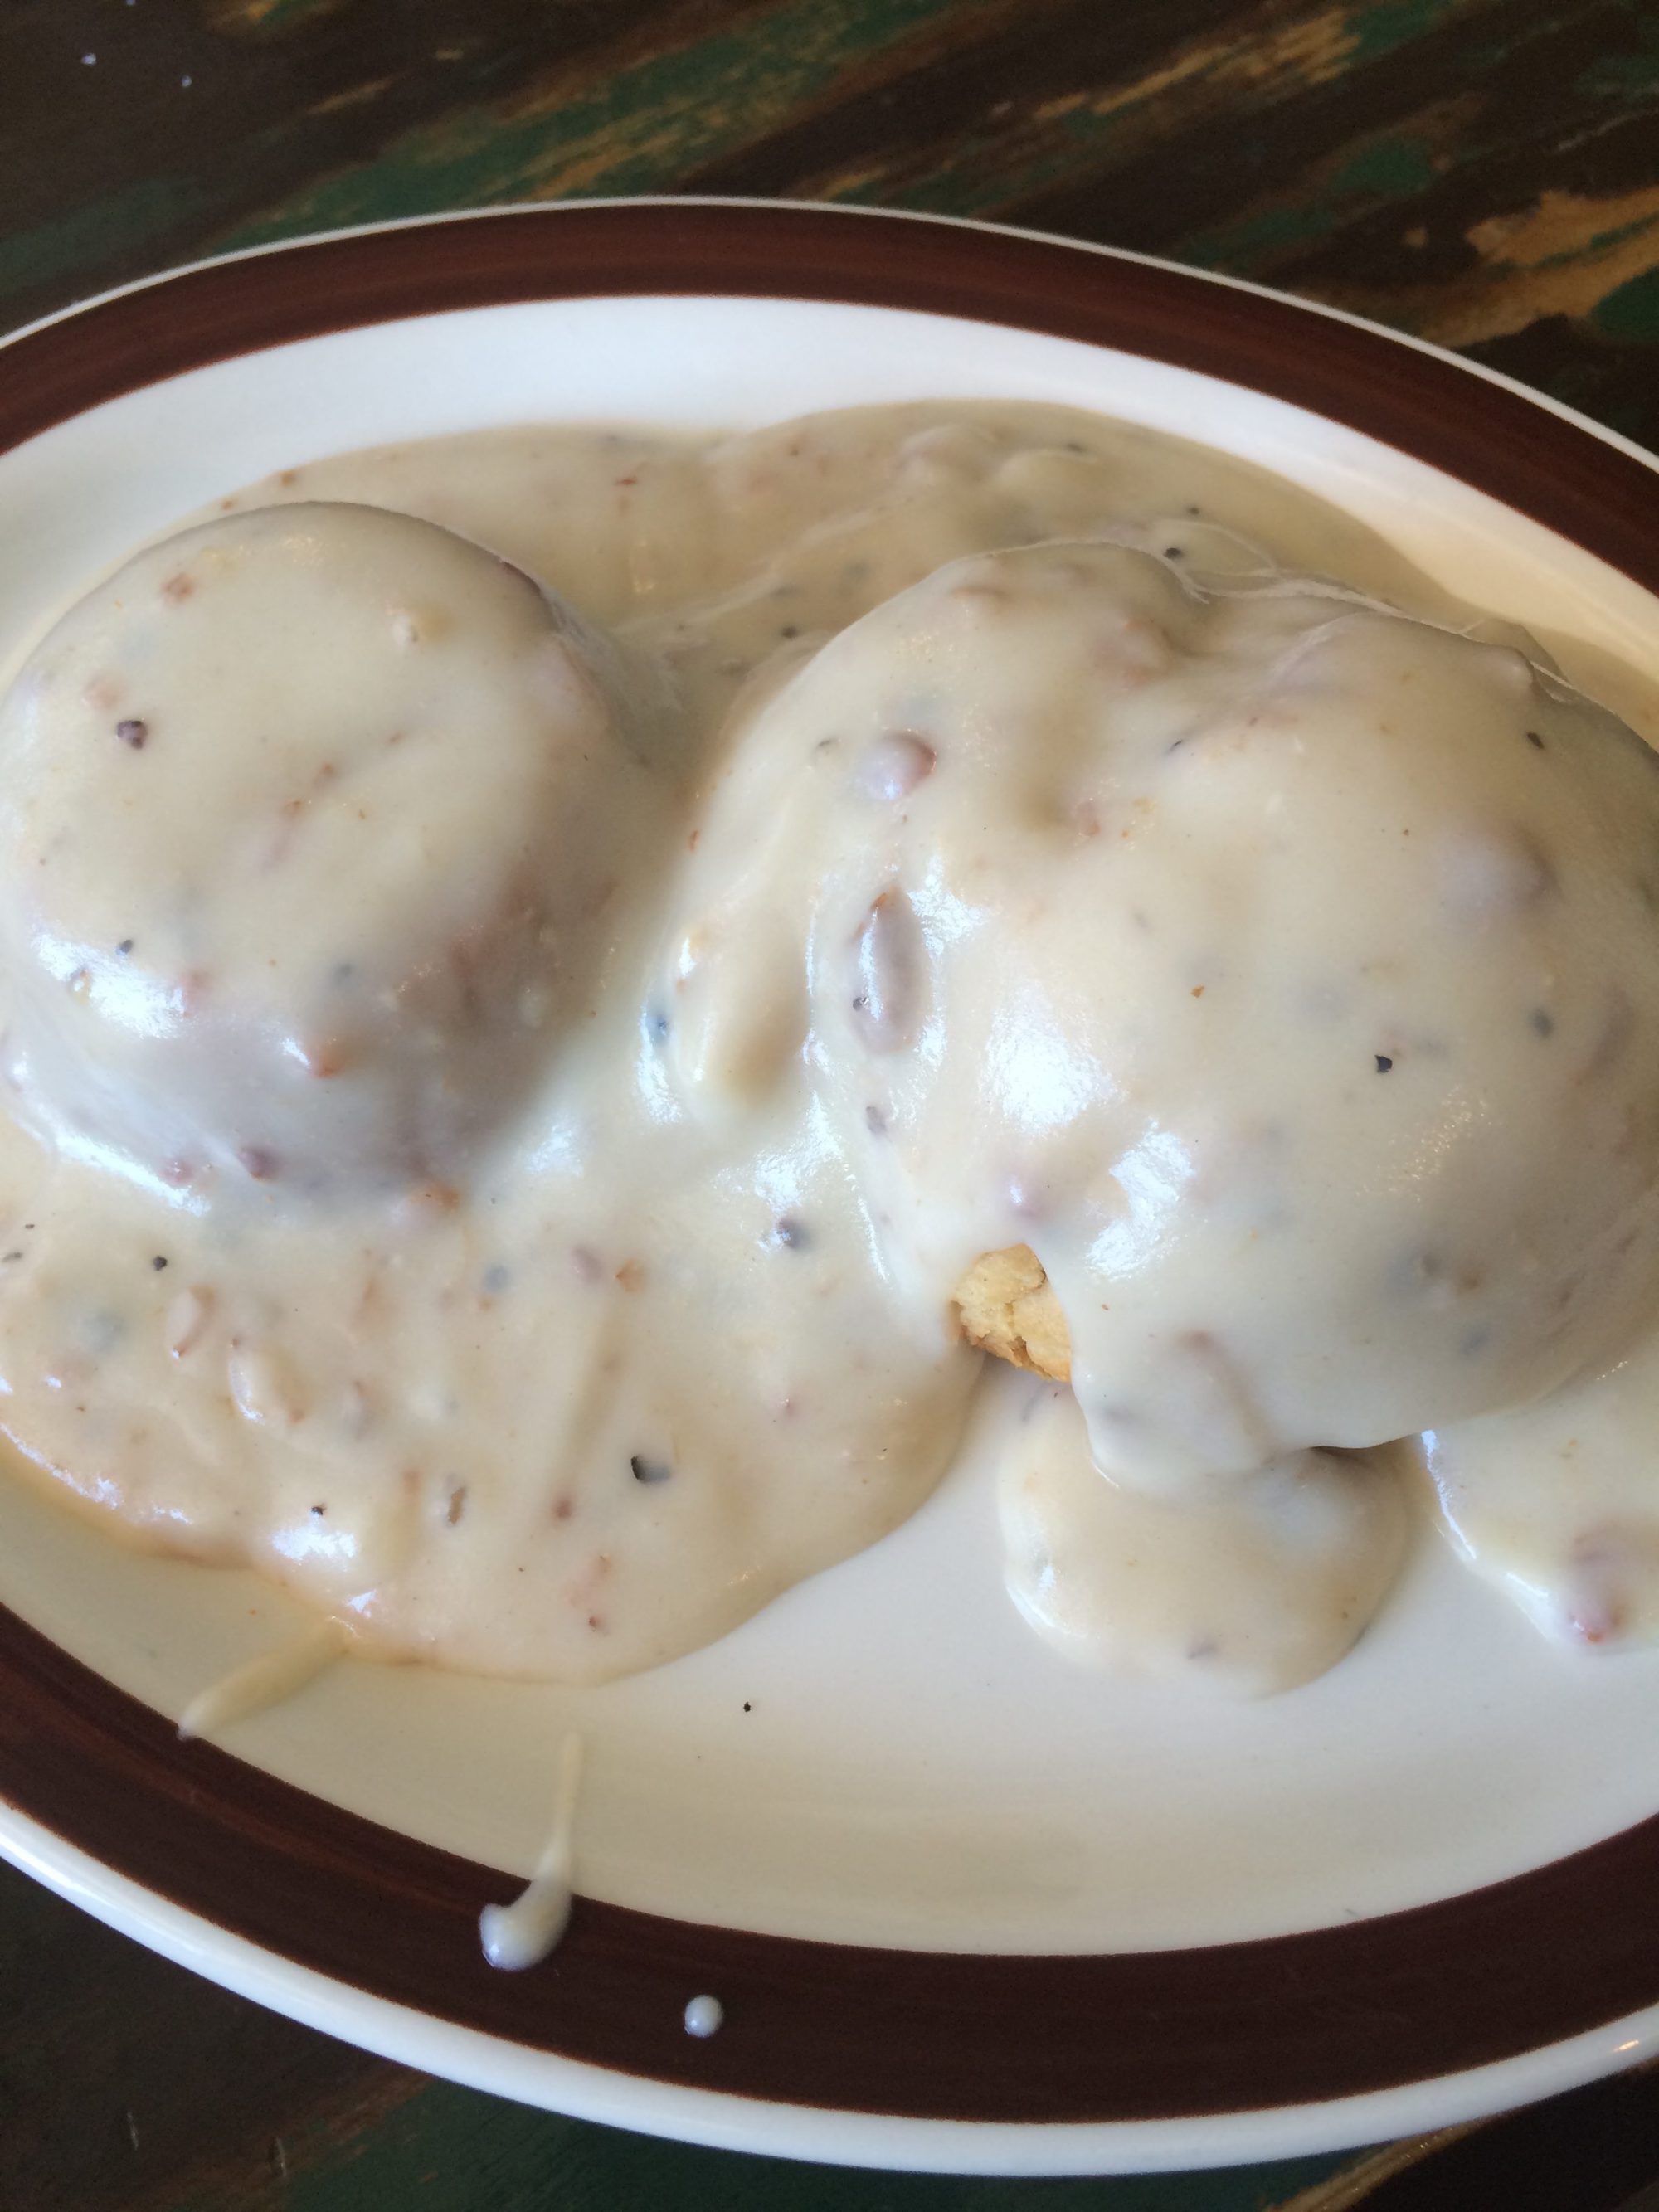 Biscuits and Gravy at BJ's Kountry Kitchen